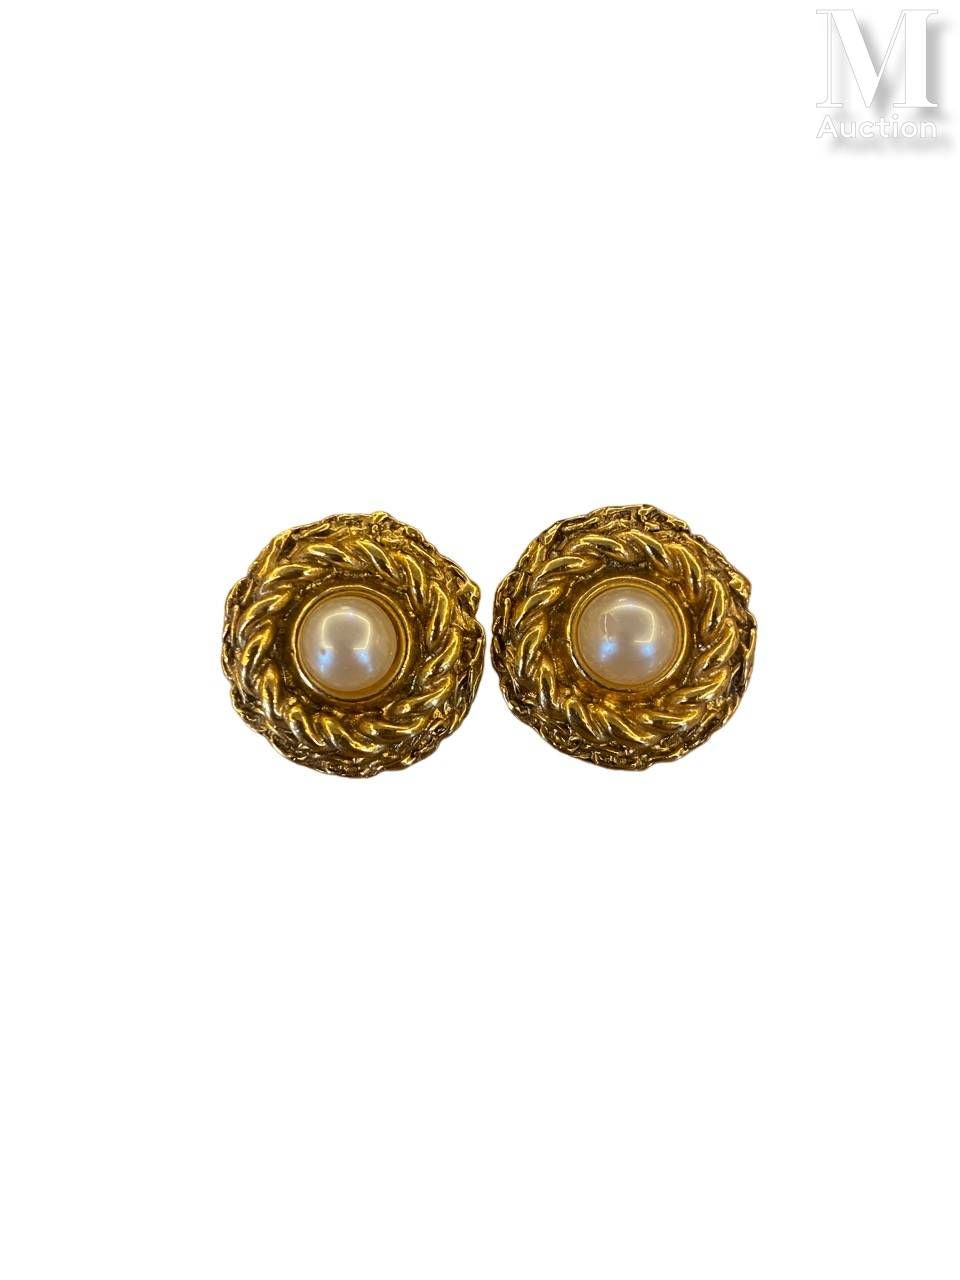 CHANEL - 1993 Pair of ear clips
in gold-plated metal and imitation pearls
Signed&hellip;